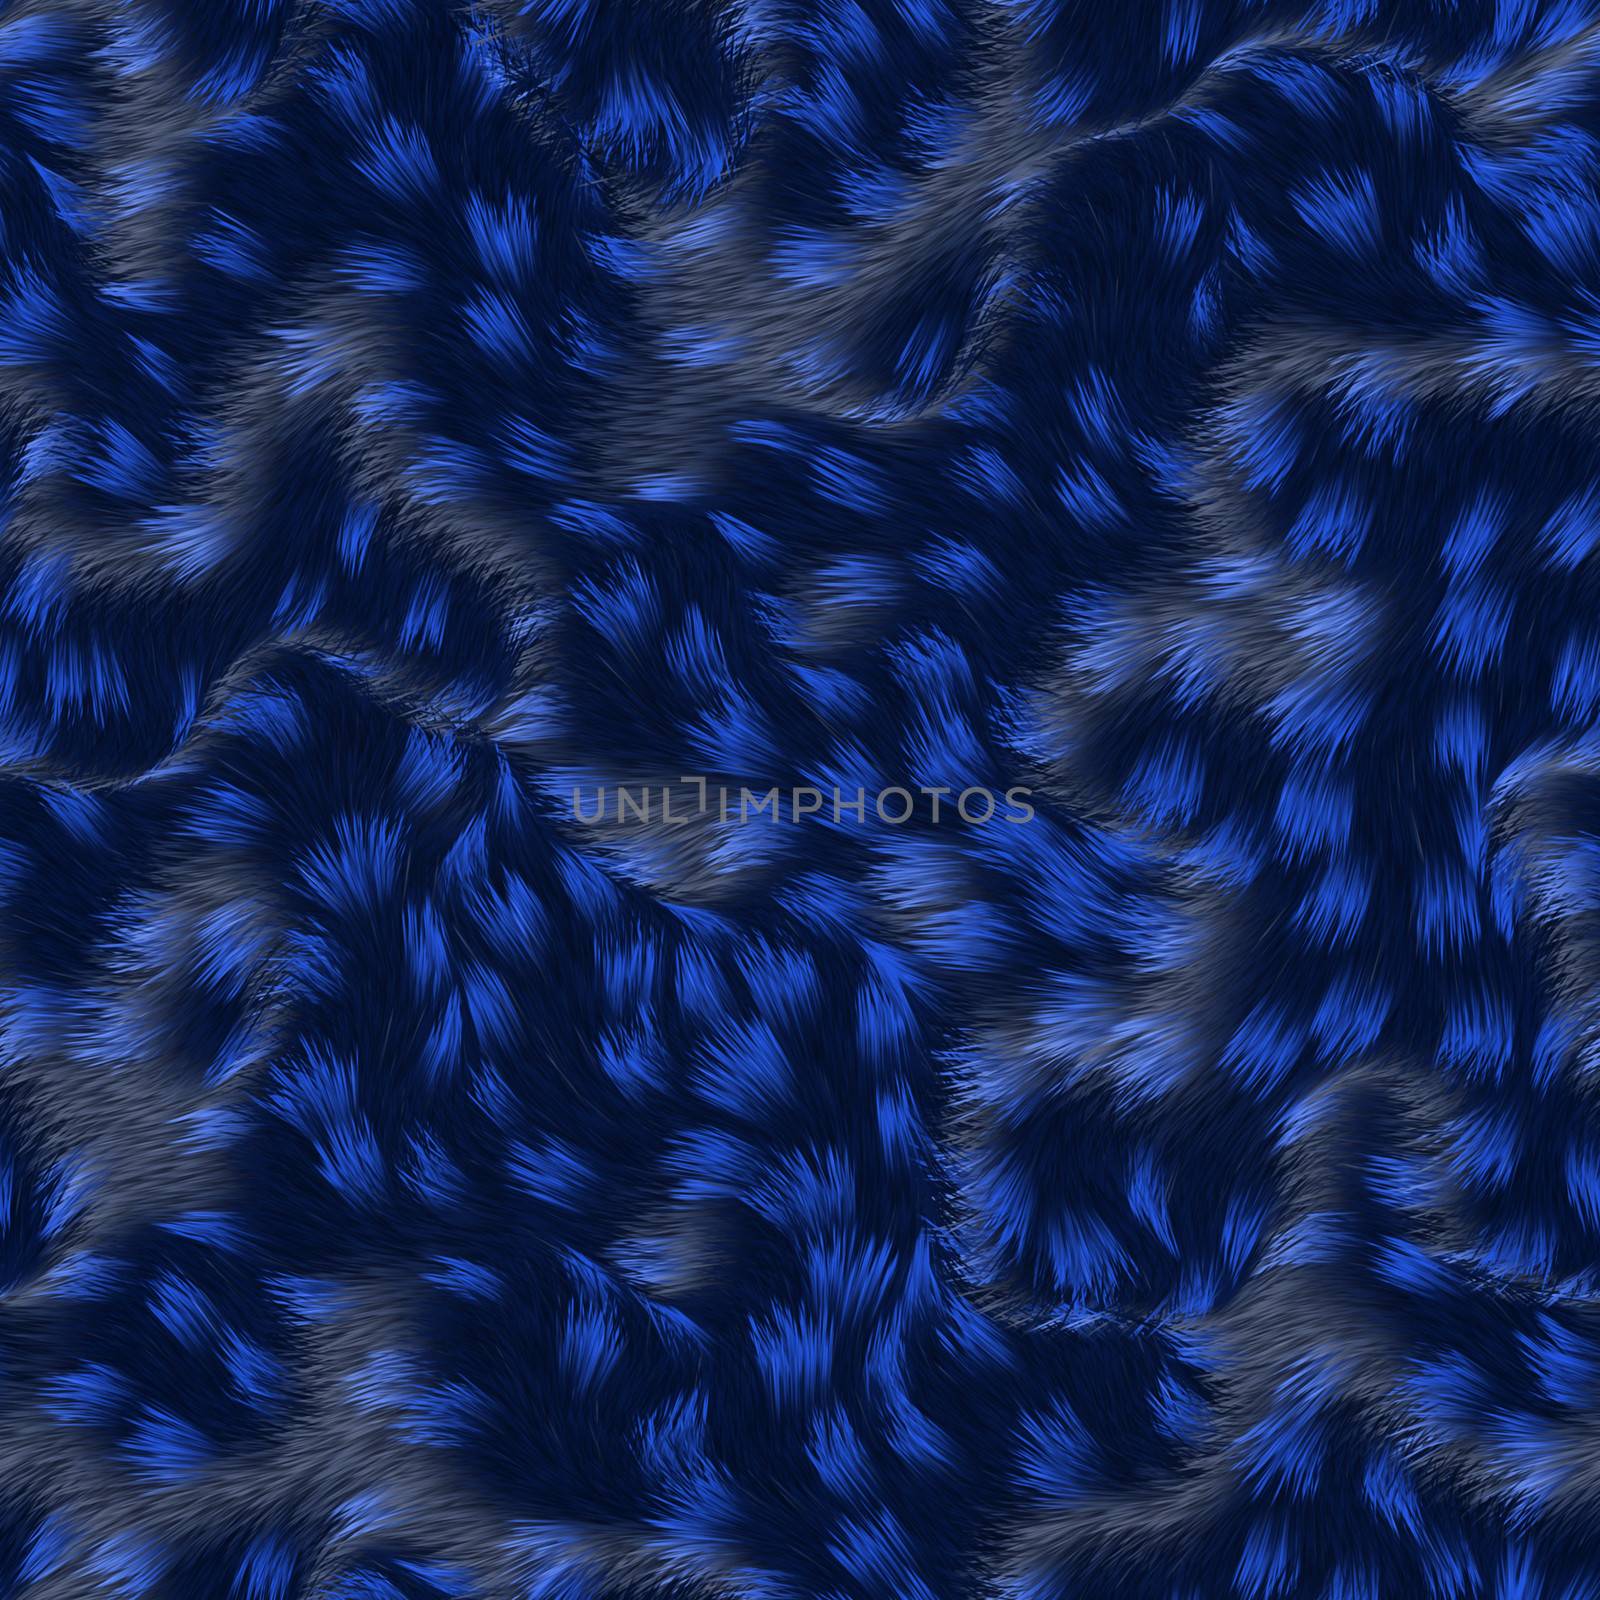 strands of fabric on a soft blue pillow.